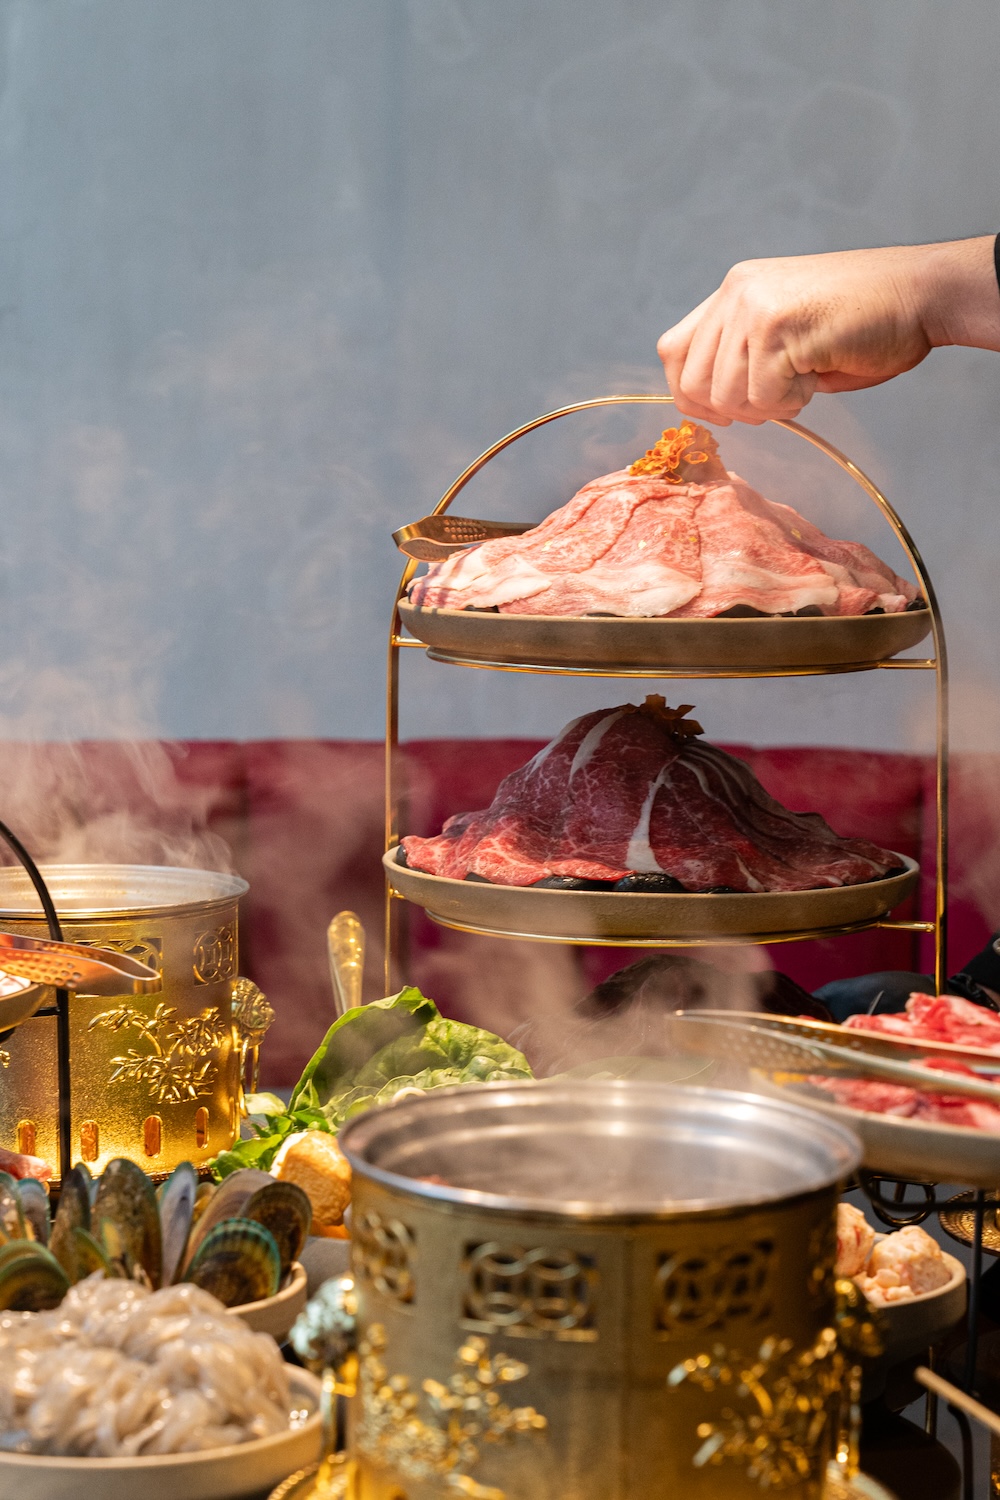 A Chairman FU hot pot warms not only stomachs but also the soul owing to its communal nature